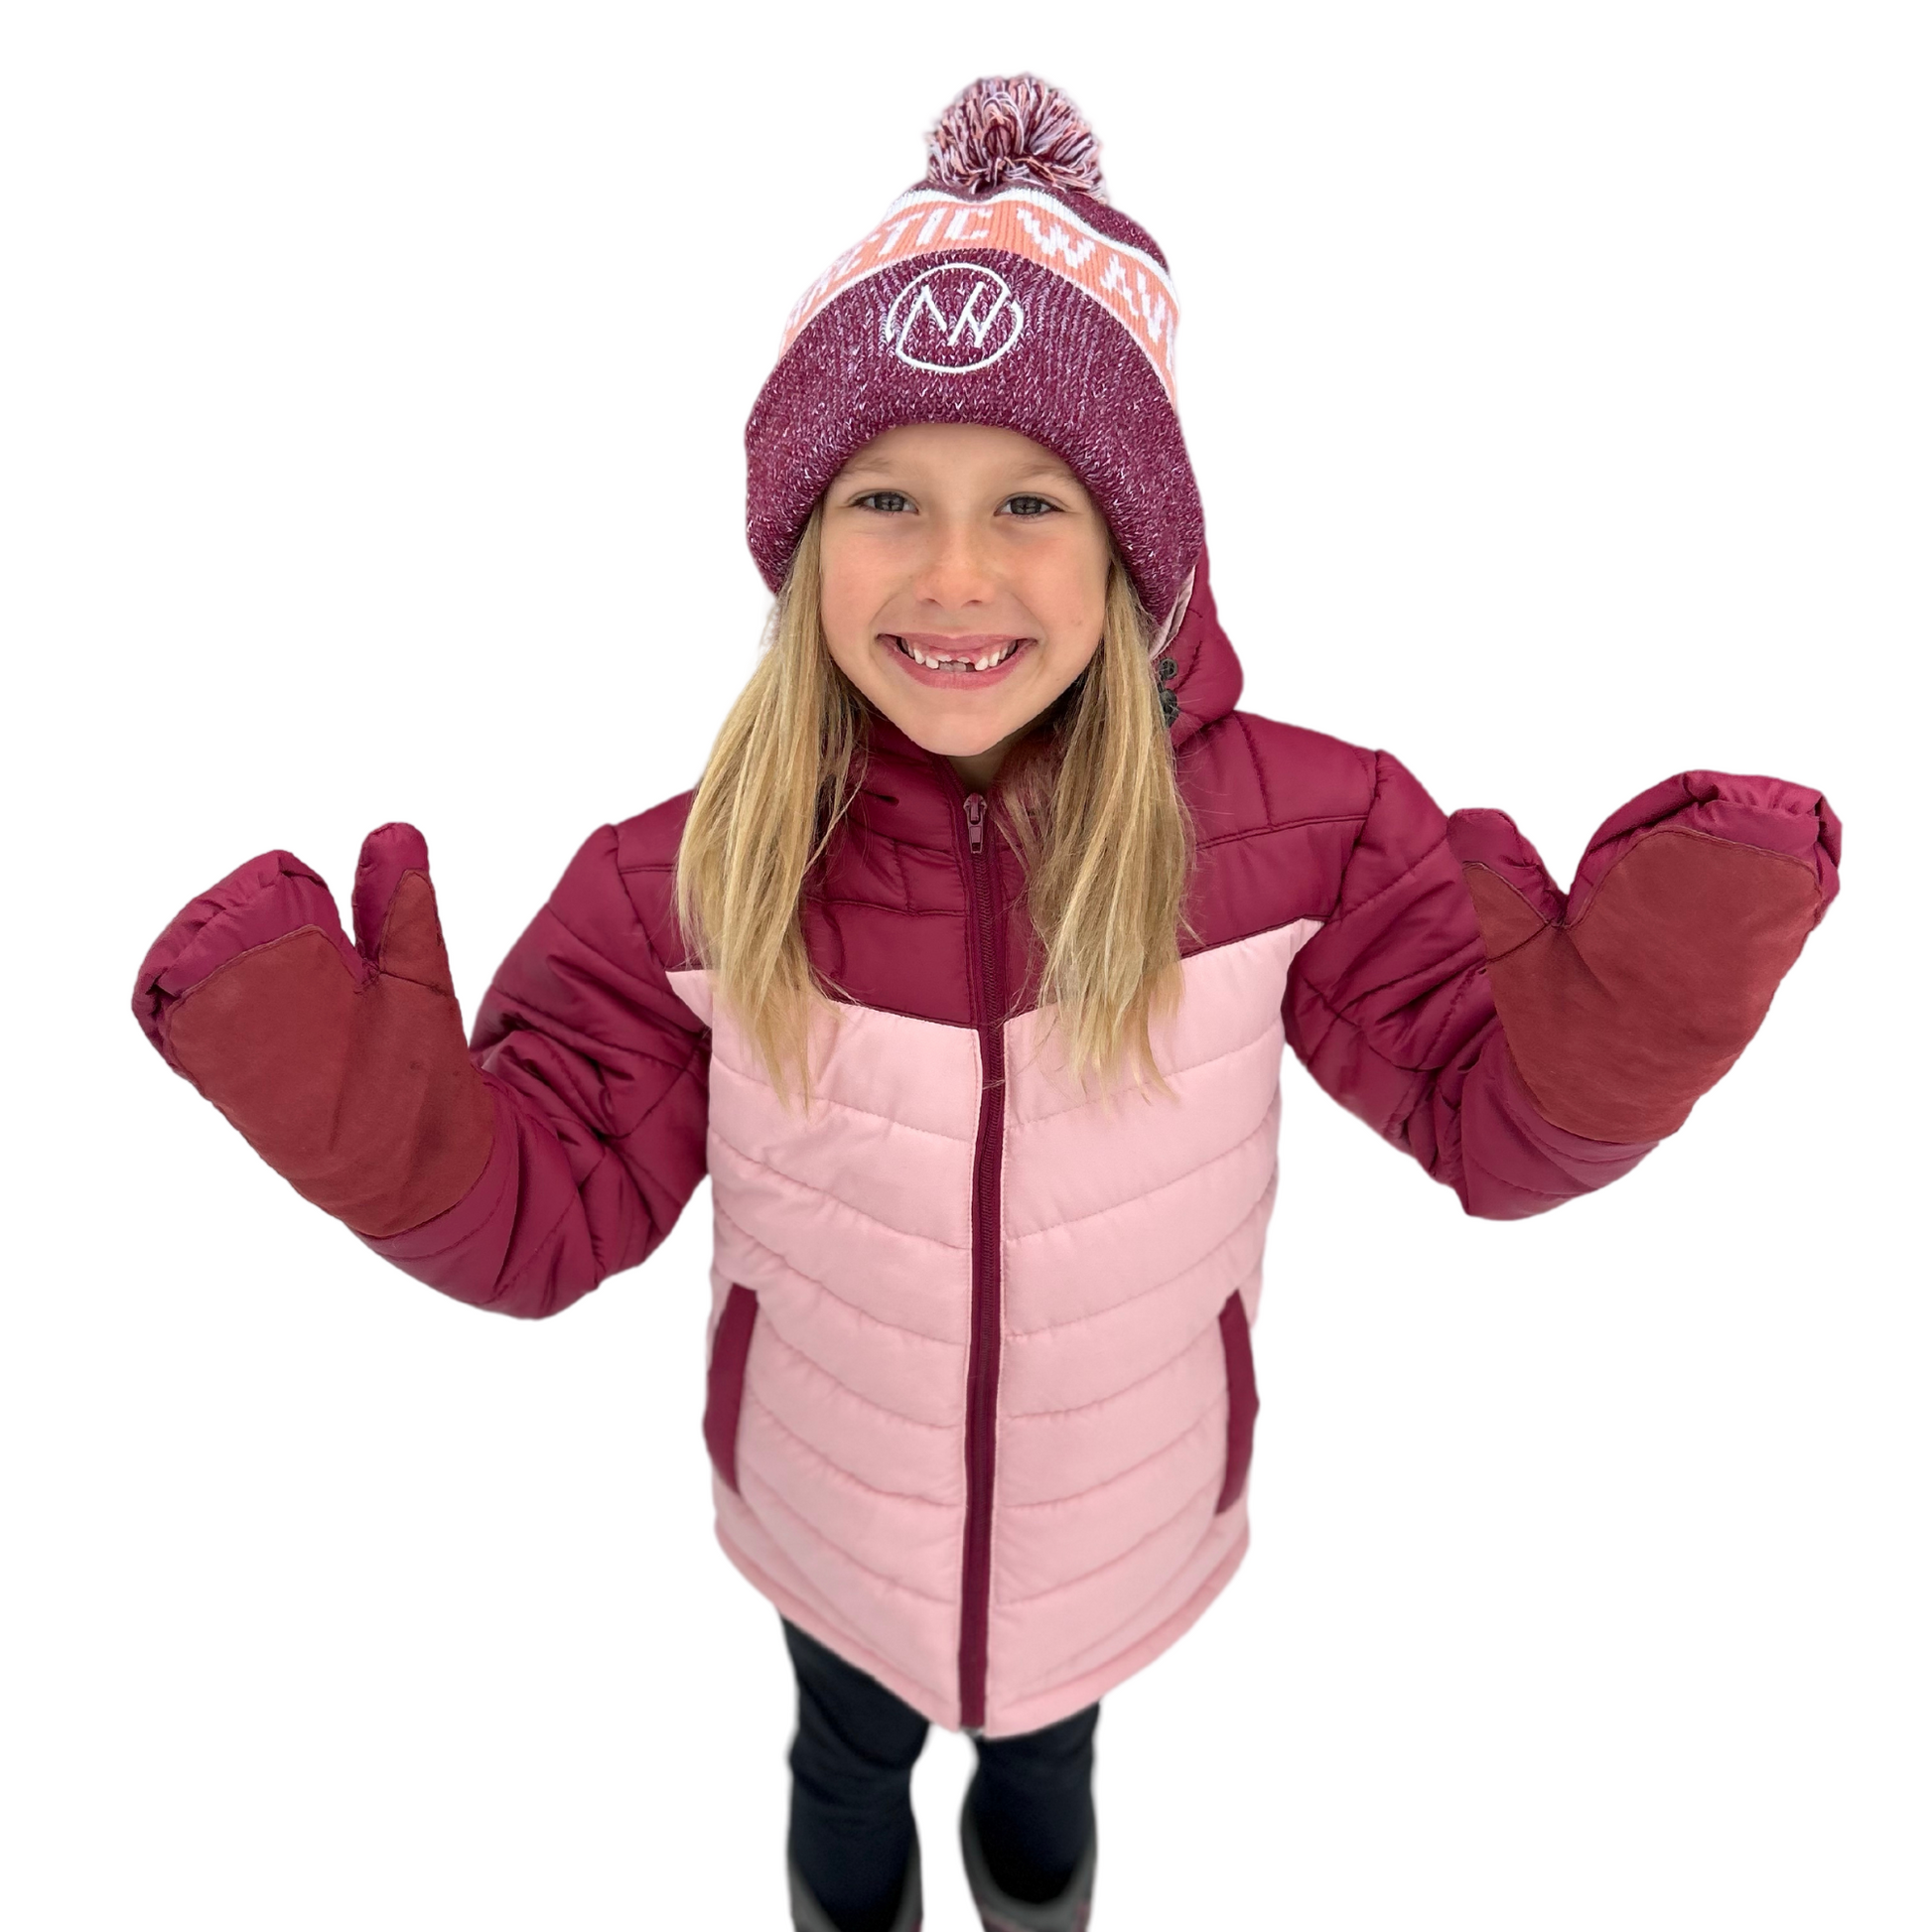 Puffer coat, puffer jacket, children's winter coat, attached mittens, attached gloves, built-in mittens, builtin mittens, built in mittens, built-in gloves, builtin gloves, built in gloves, adaptive coat, special needs coat, unisex, fleece lining, recycled shell, rpet, warm, zip up jacket, unisex, fleece lining, warm coat, recycled shell, rpet, girls winter coat, girls puffer jacket, best kids jackets, jacket with attached gloves, sale, clearance, spring sale